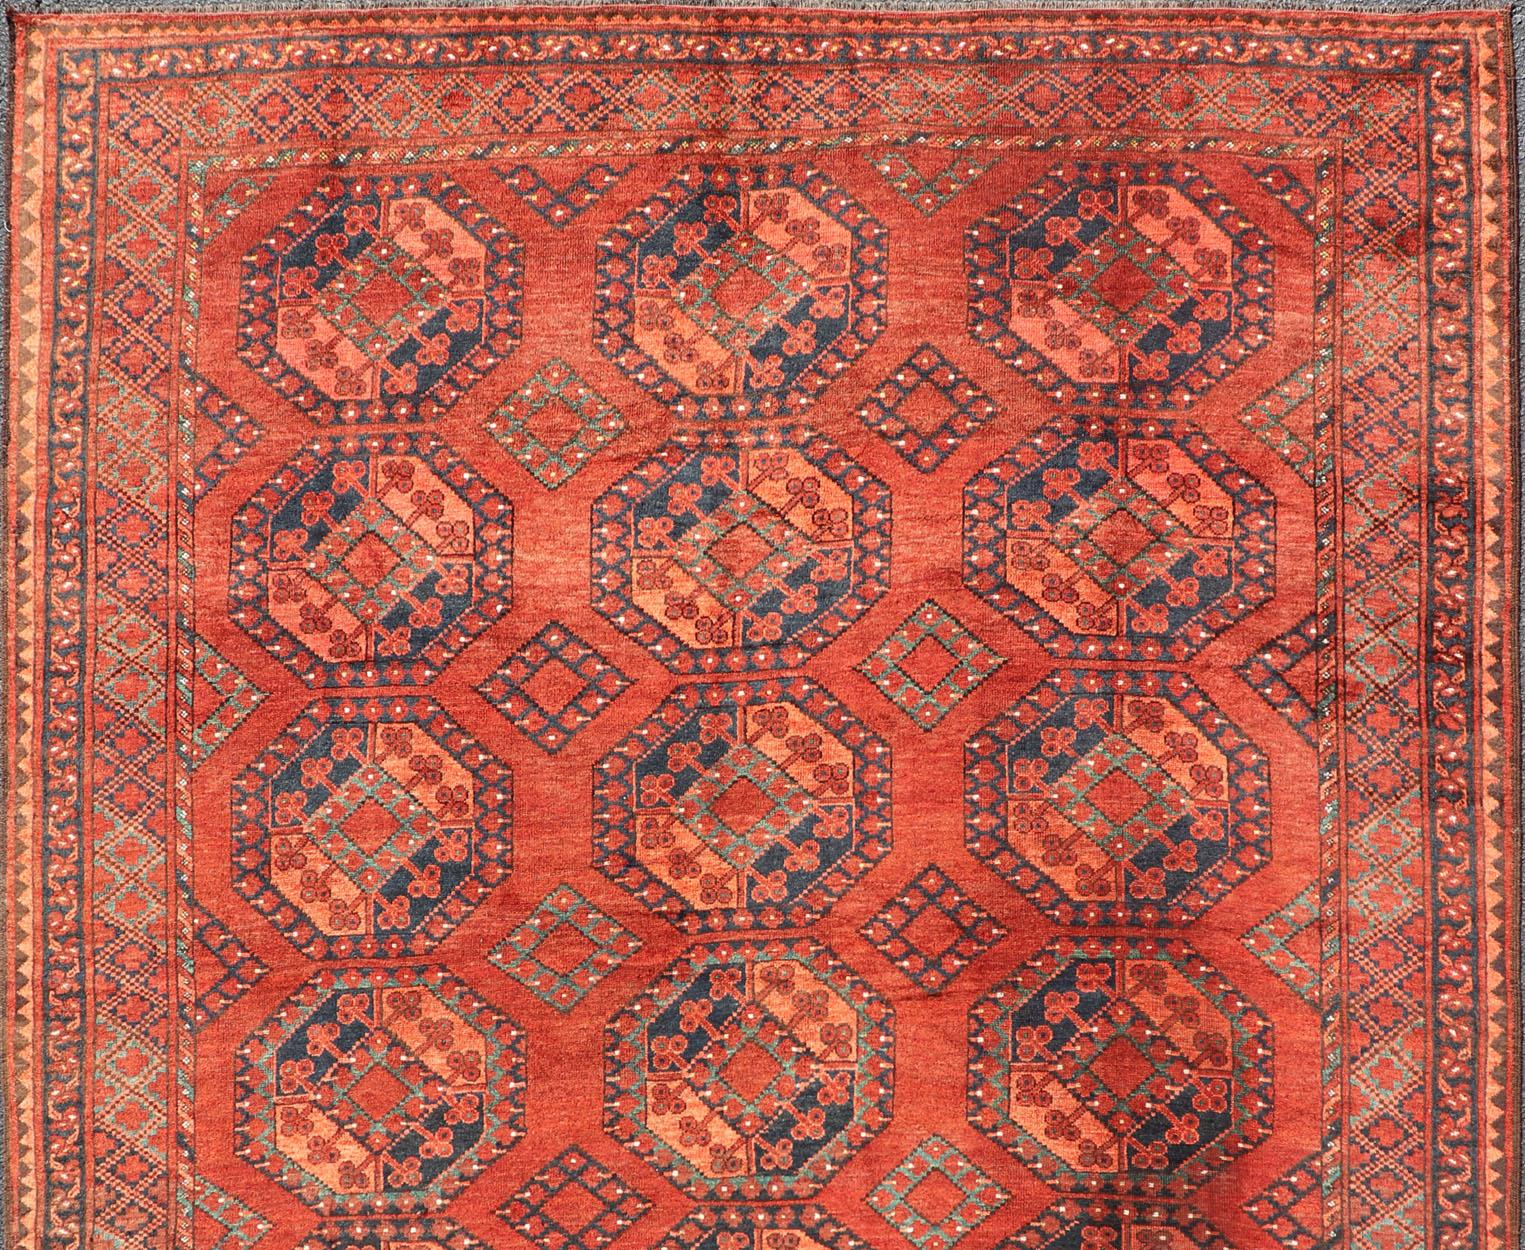 Turkestan Early 20th Century Hand-Knotted Turkomen Ersari Rug in Wool with Gul Design For Sale